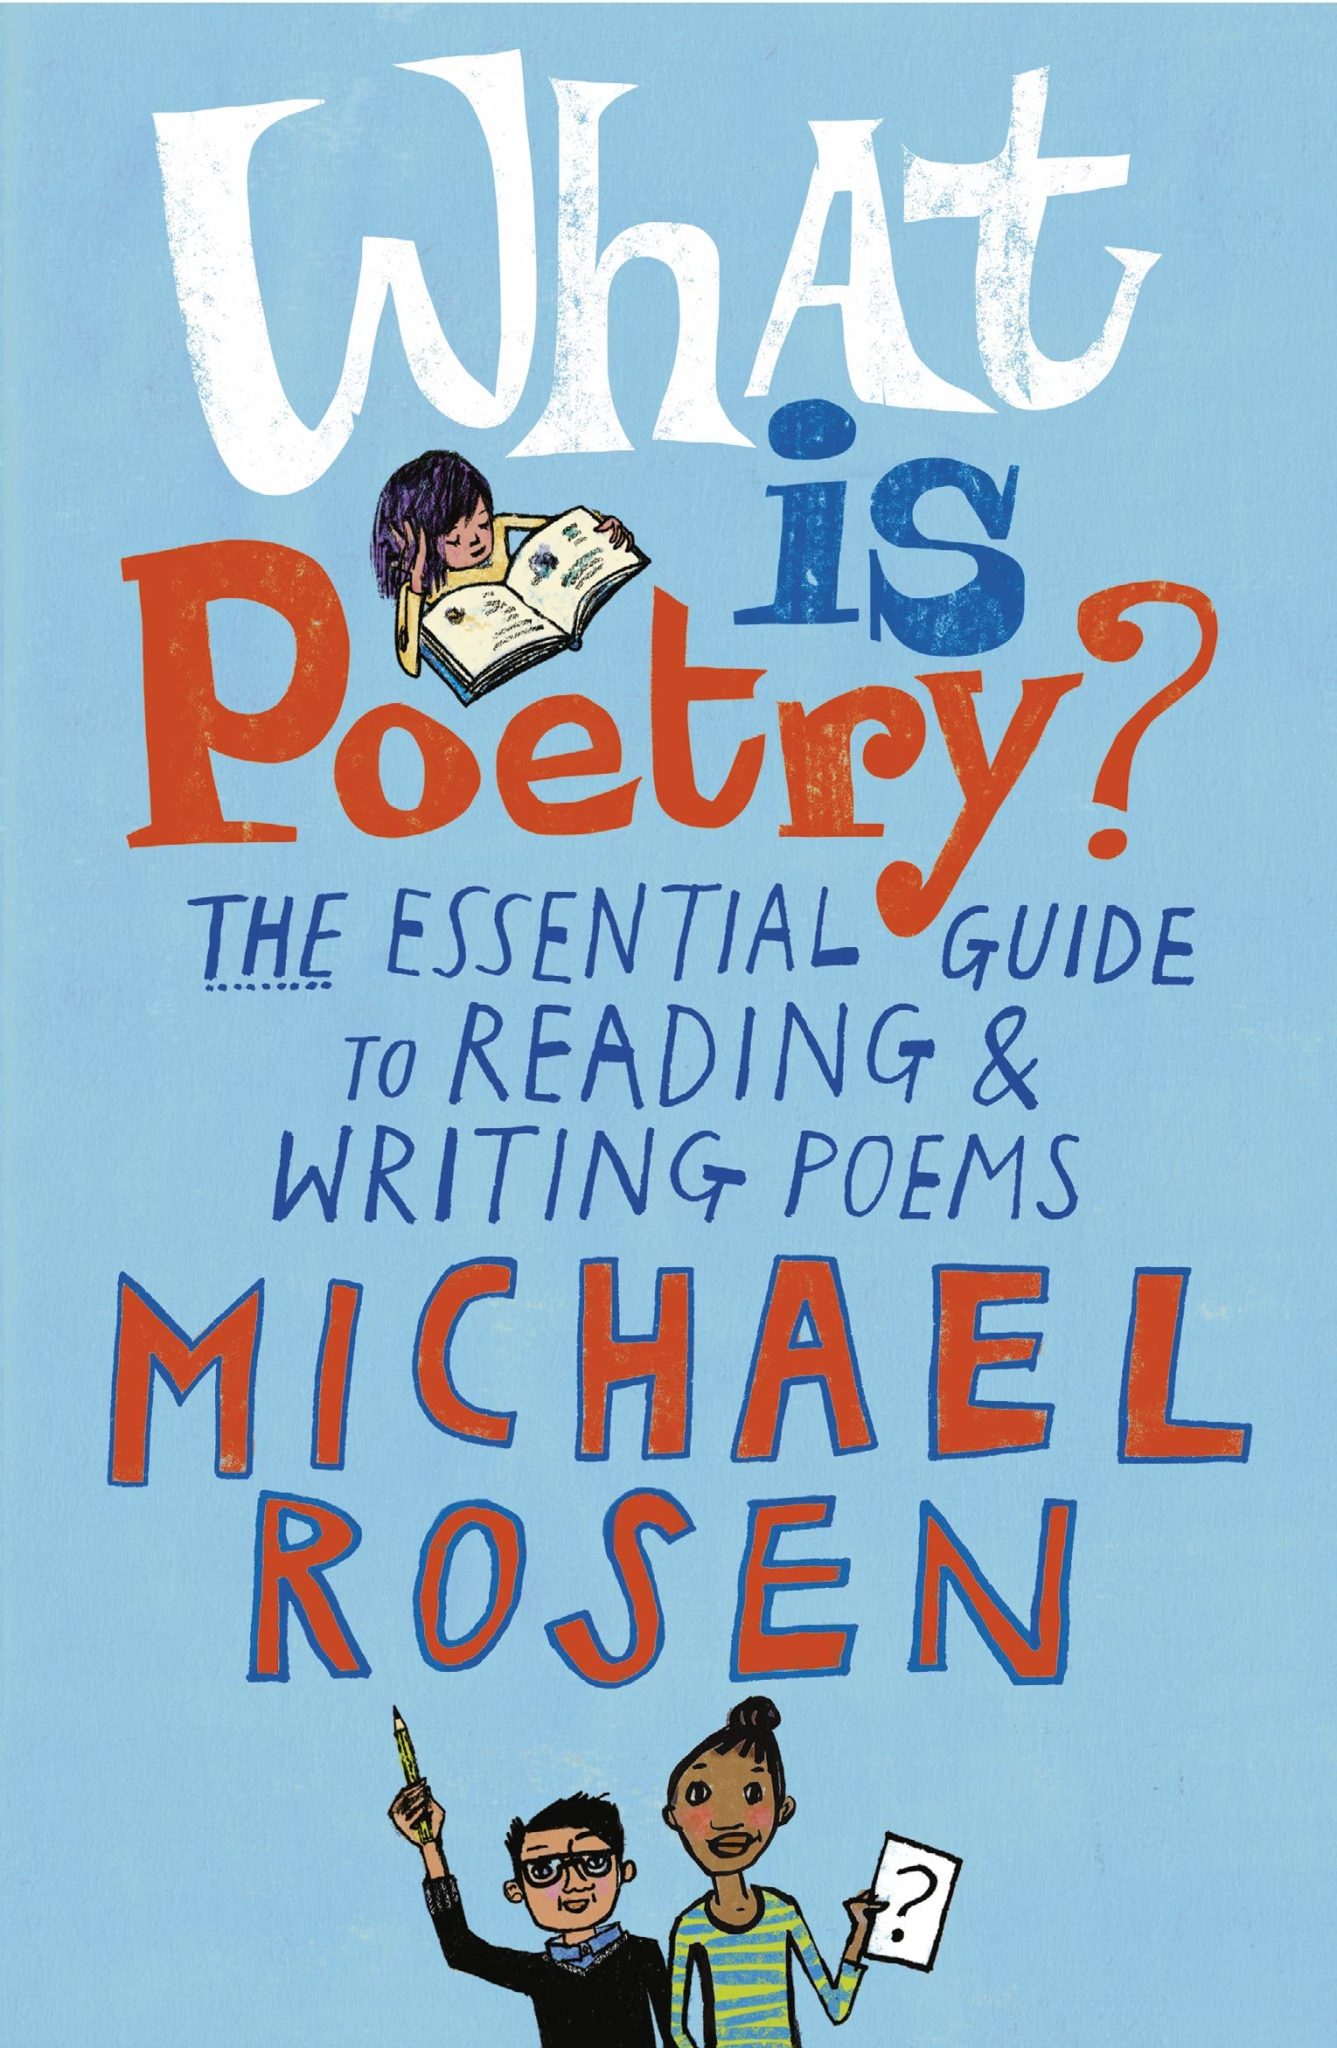 "What Is Poetry?" by Michael Rosen